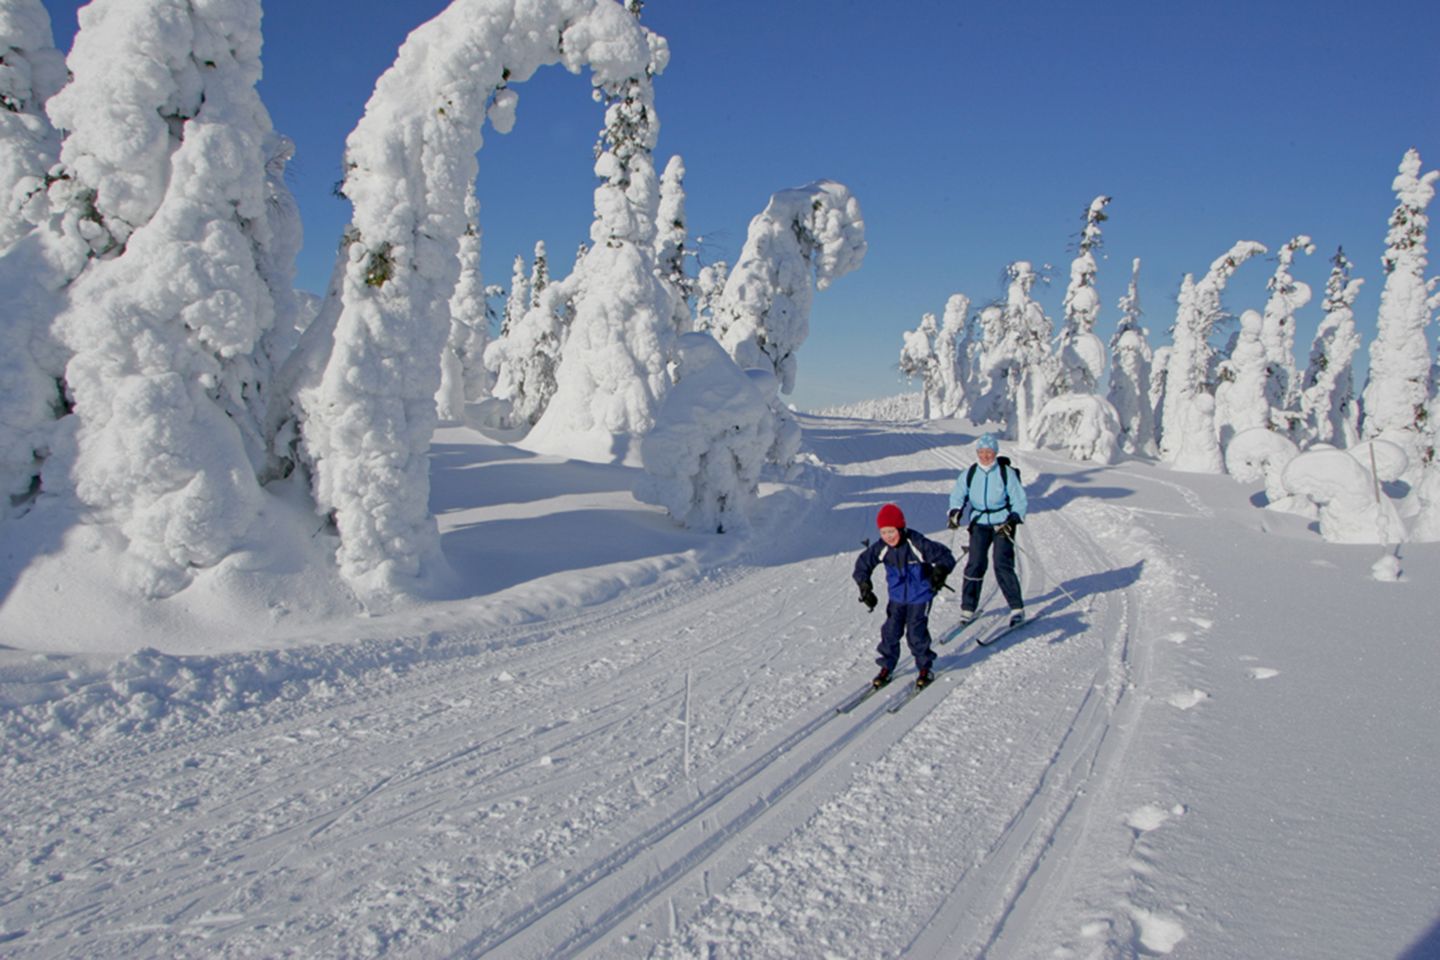 Skiing on a snowy, winter day in Arctic Lapland